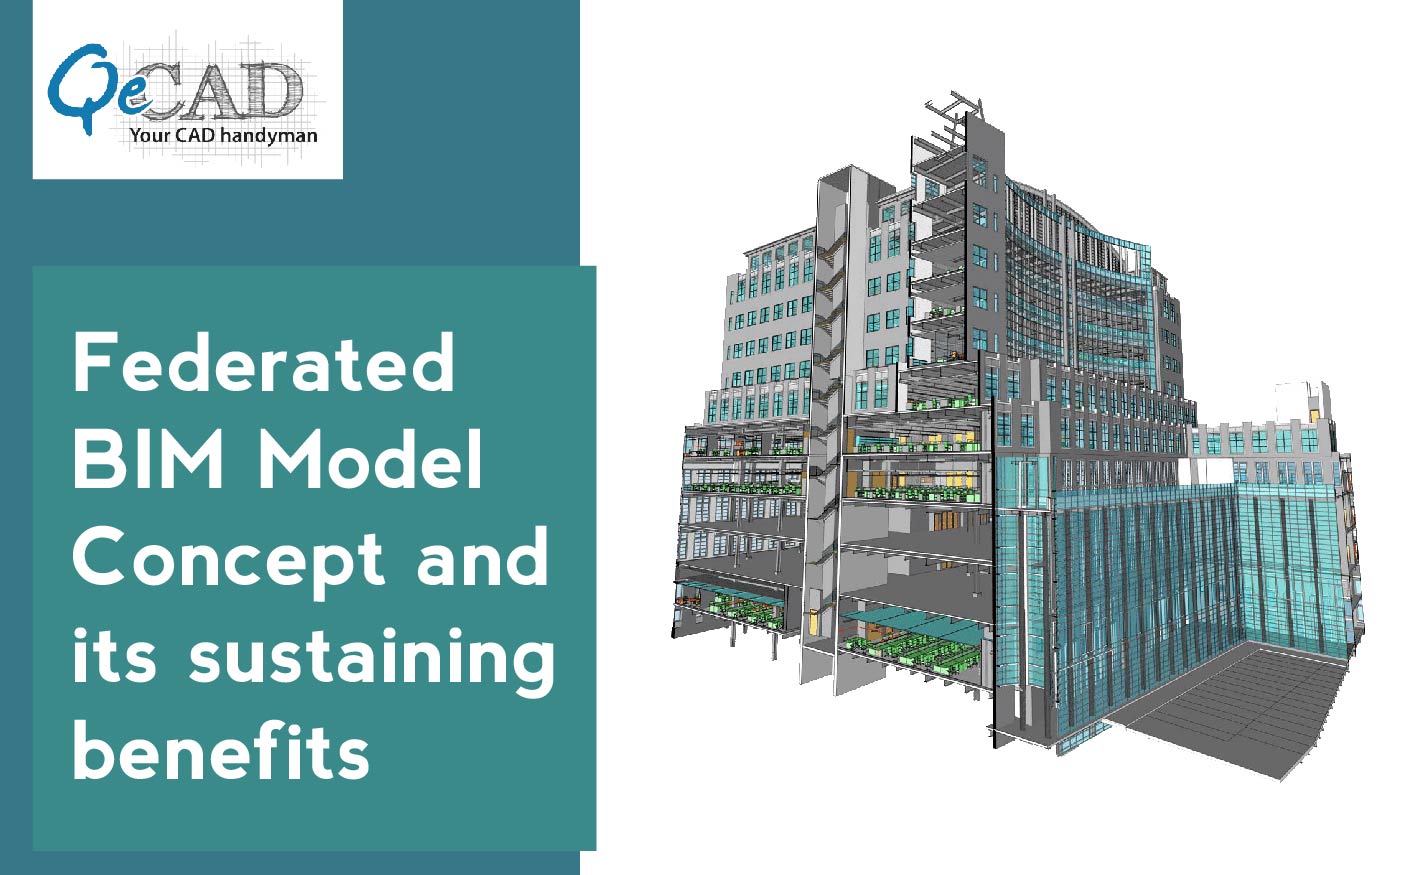 Federated BIM Model Concept and its sustaining benefits